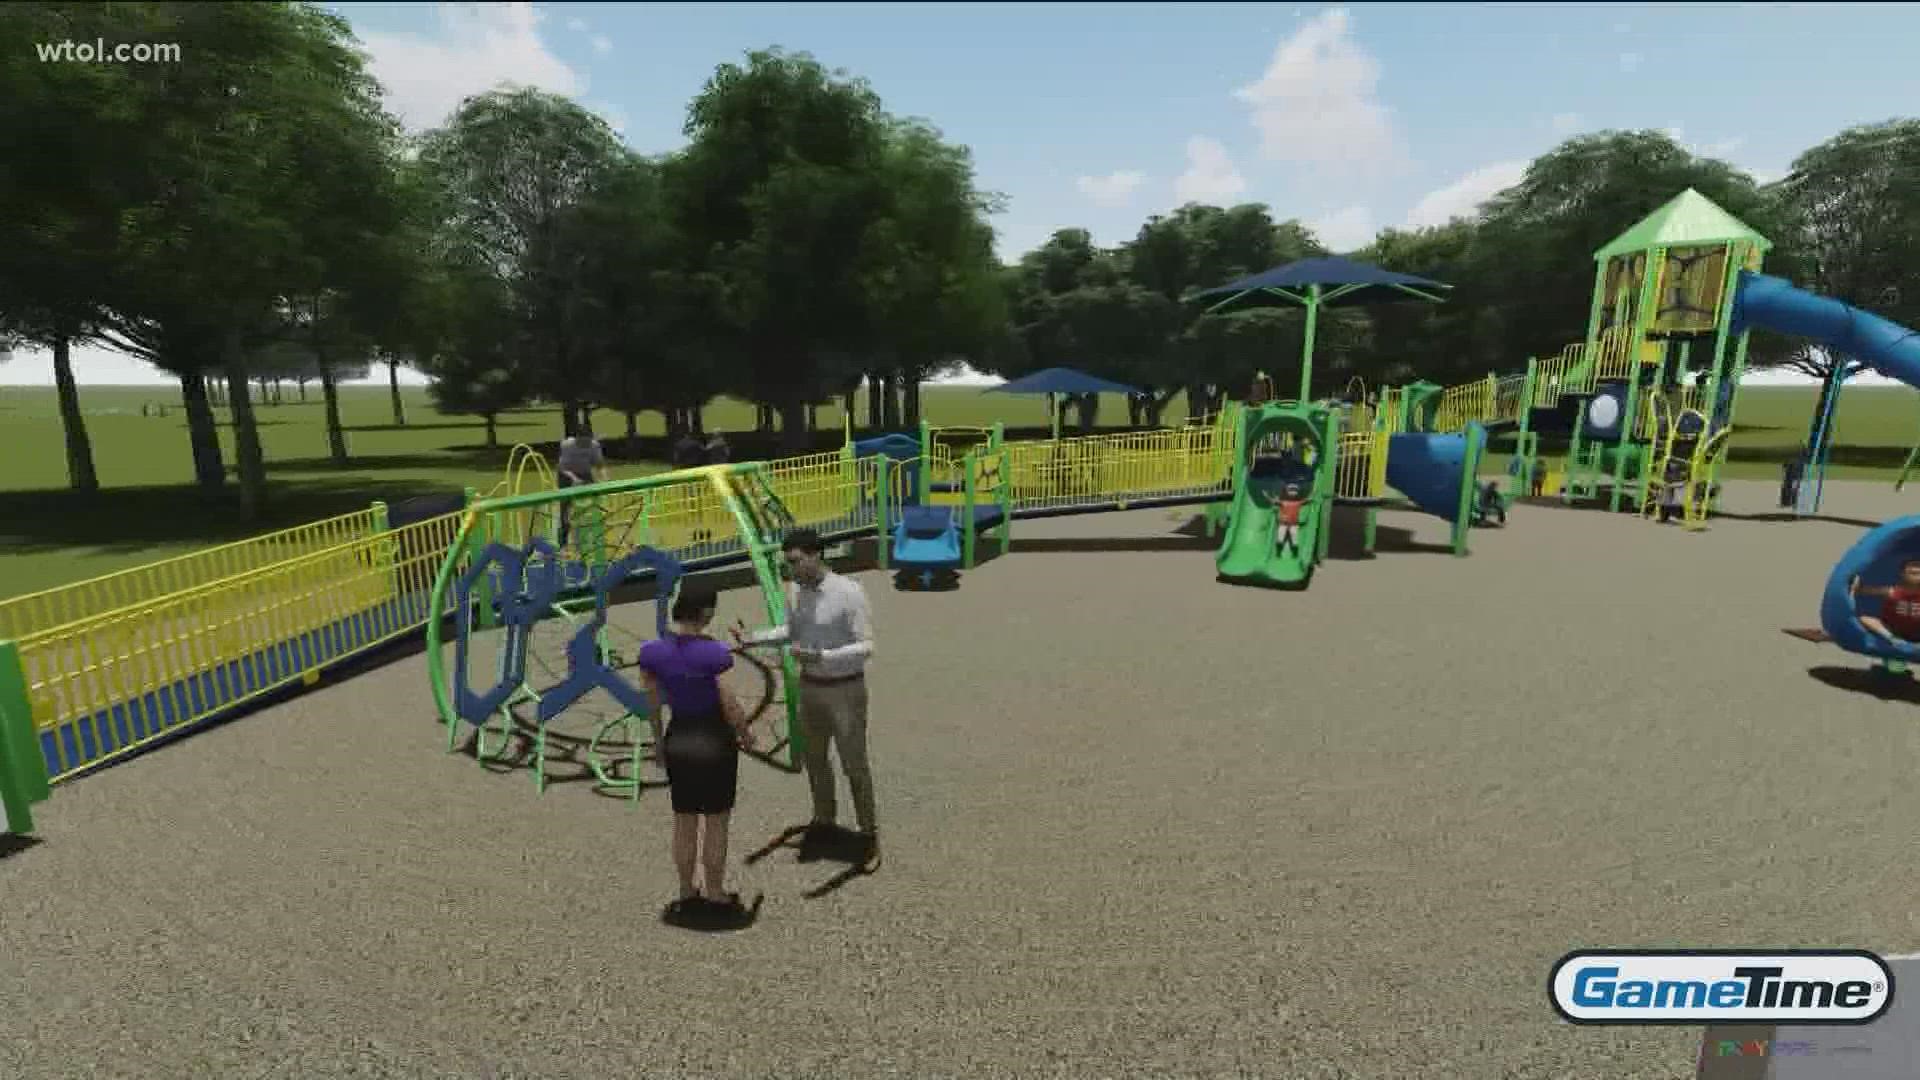 The $700,000 project would be fully funded with portions of Tiffin's American Rescue Plan Act funds and replace the current 20-year-old playground.